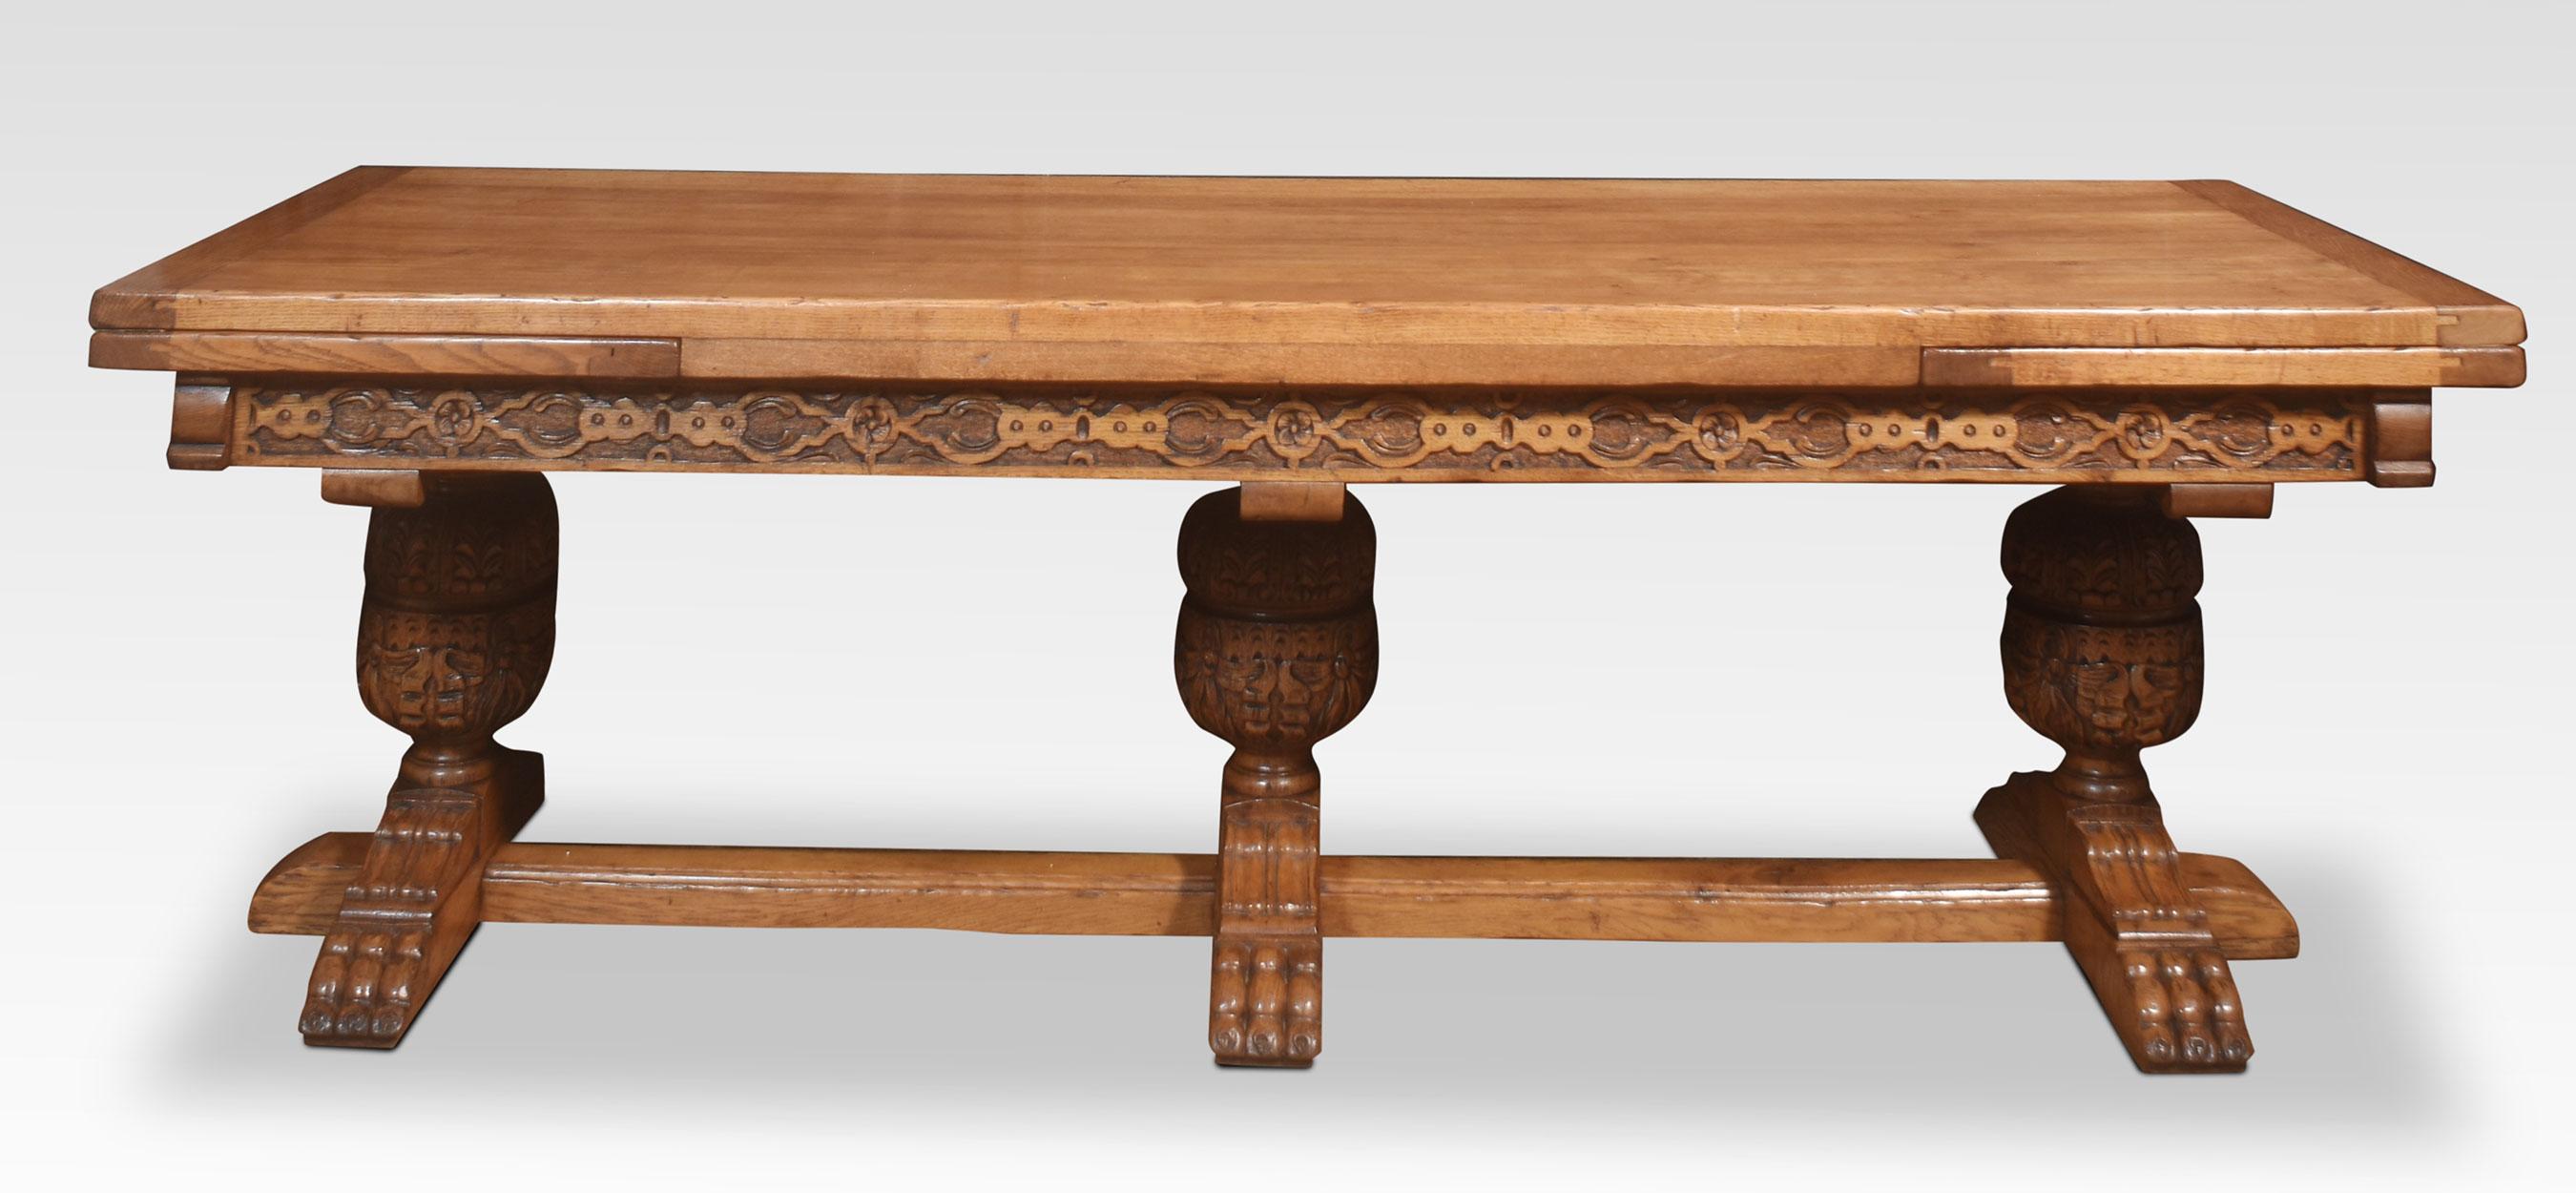 Very large oak refectory table the thick solid oak top and pull-out ends above carved freeze supported on three bulbous cup & cover legs leading down to paw feet united by stretchers.
Dimensions
Height 30 Inches
Width 96 Inches when open 144